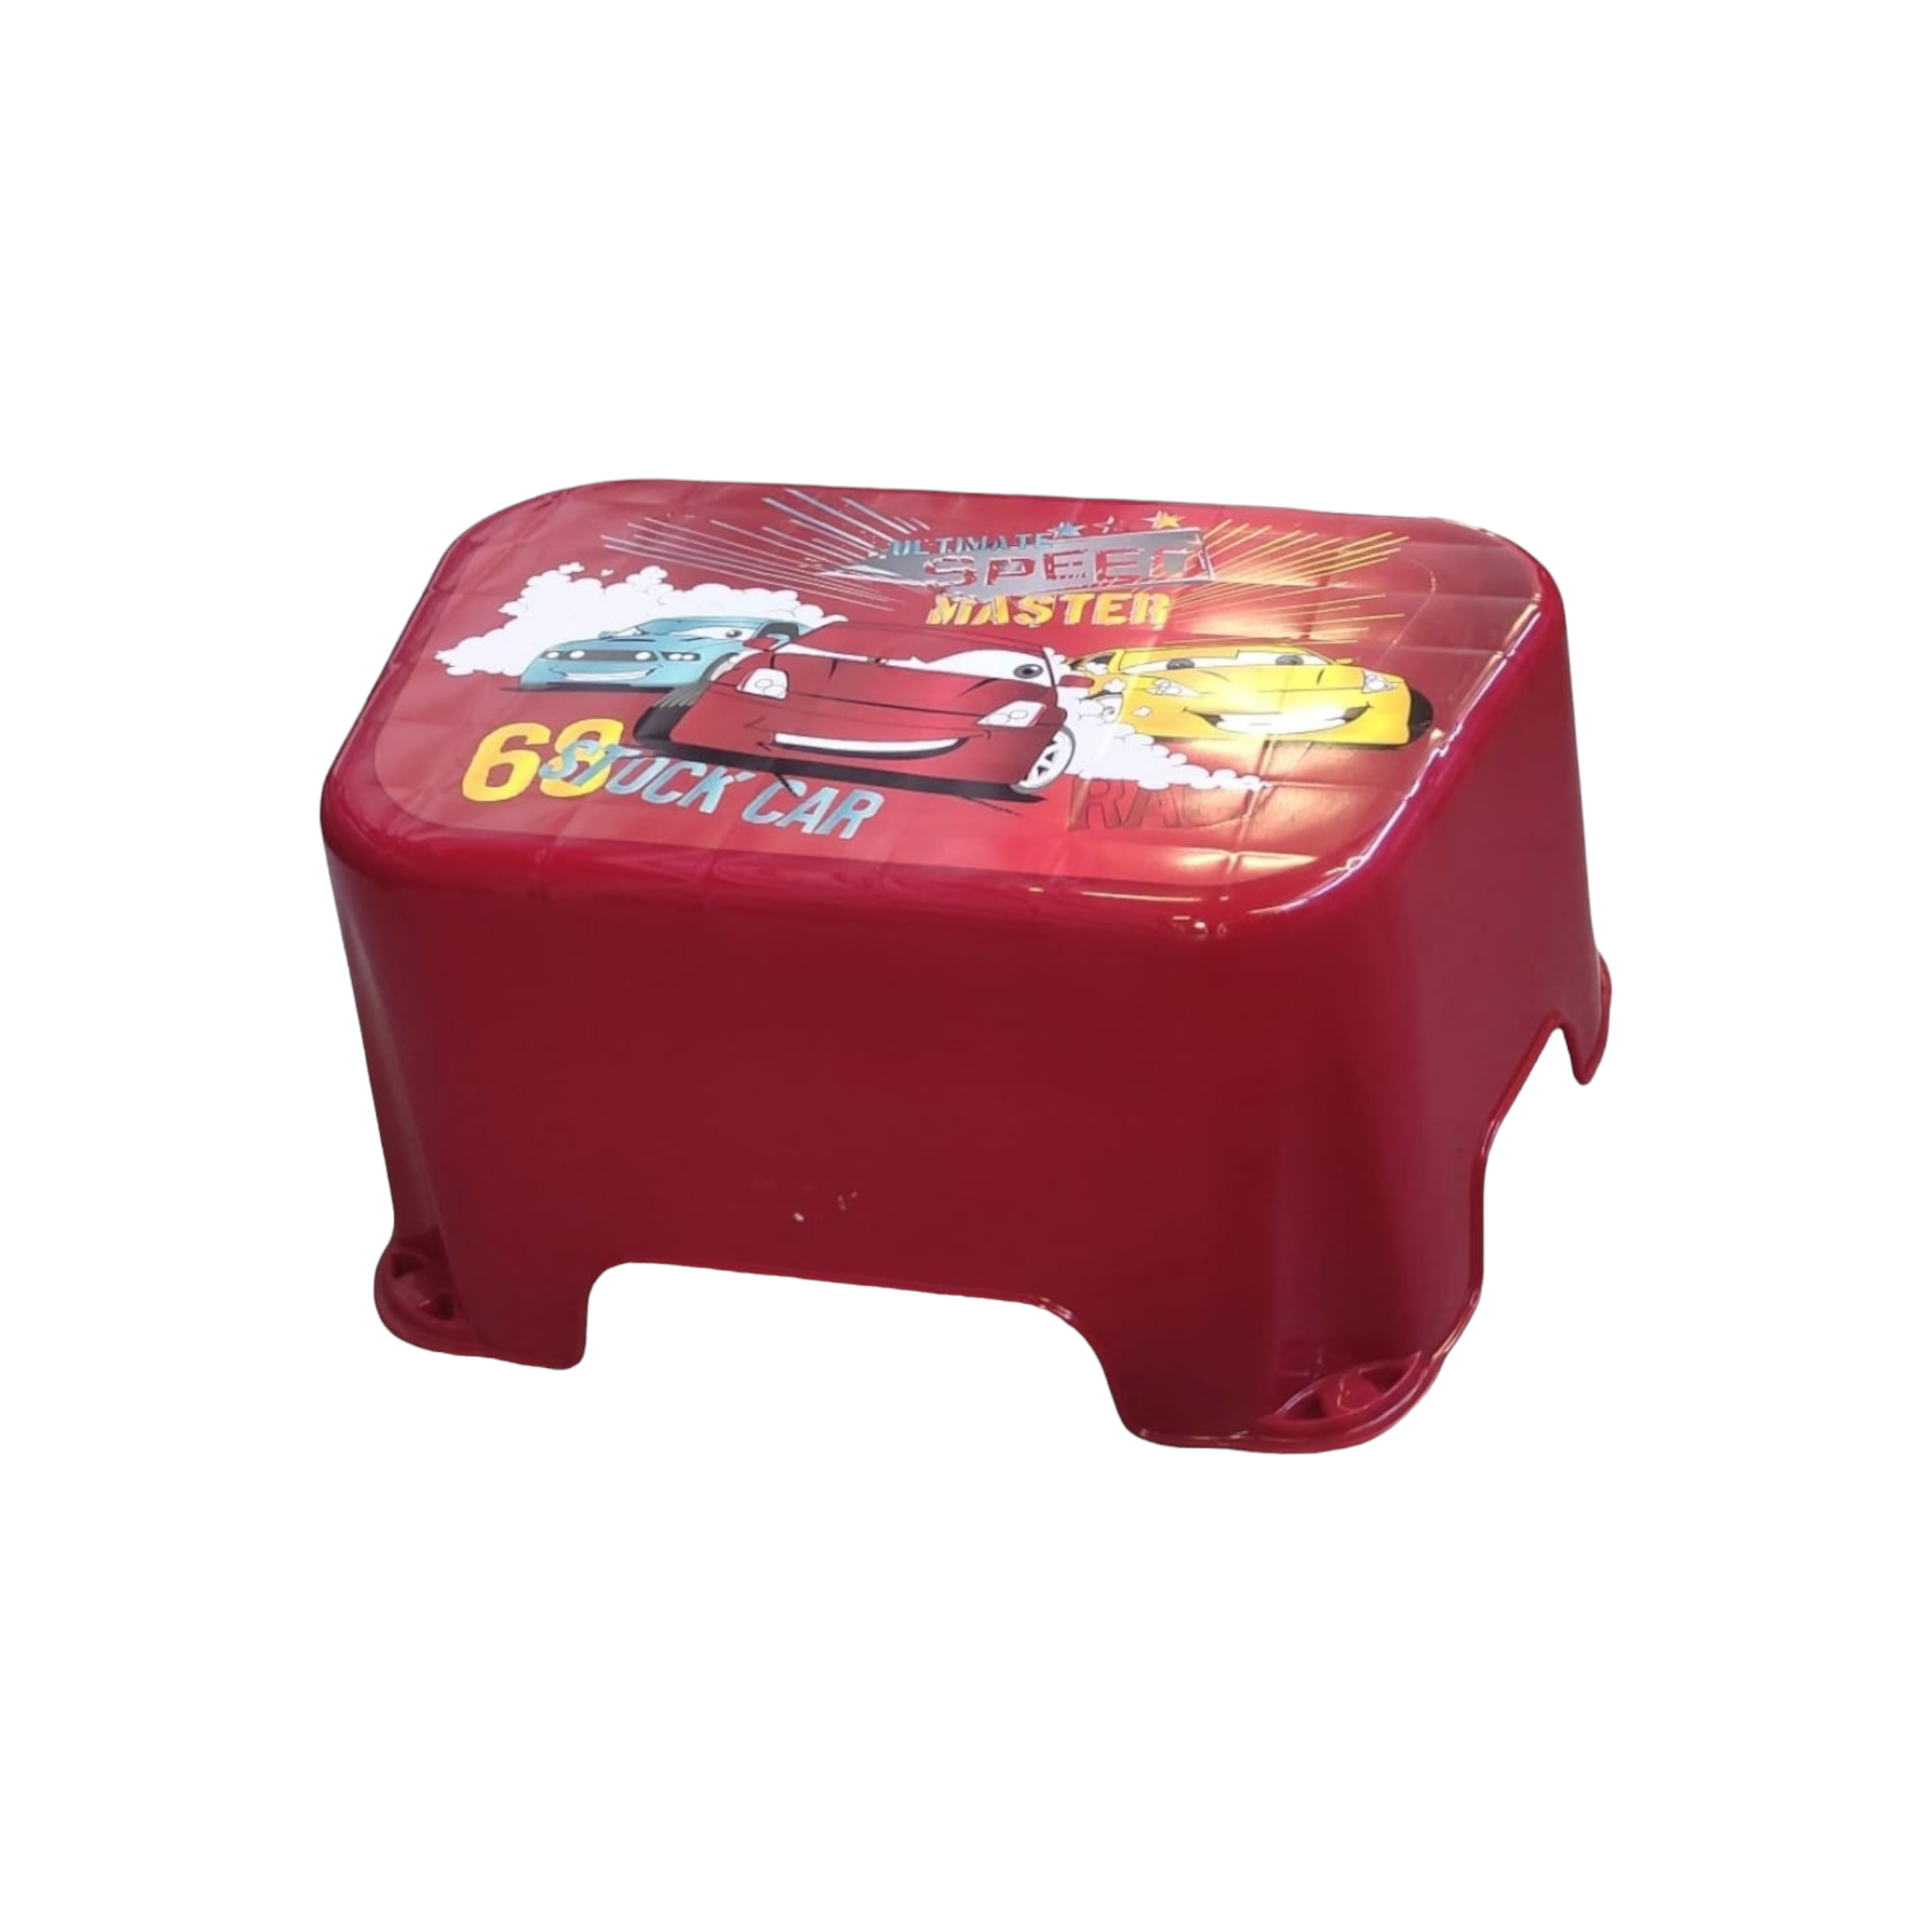 Tuffex Plastic Single Step Stool For Kids Patterned